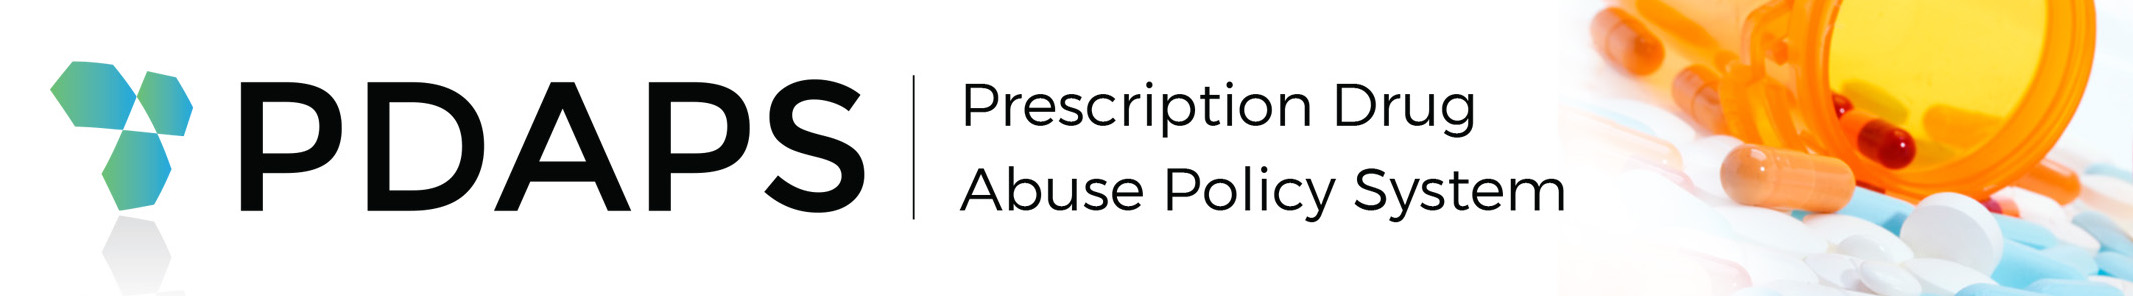 Prescription Drug Abuse Policy System - PDAPS - Powered by MonQcle